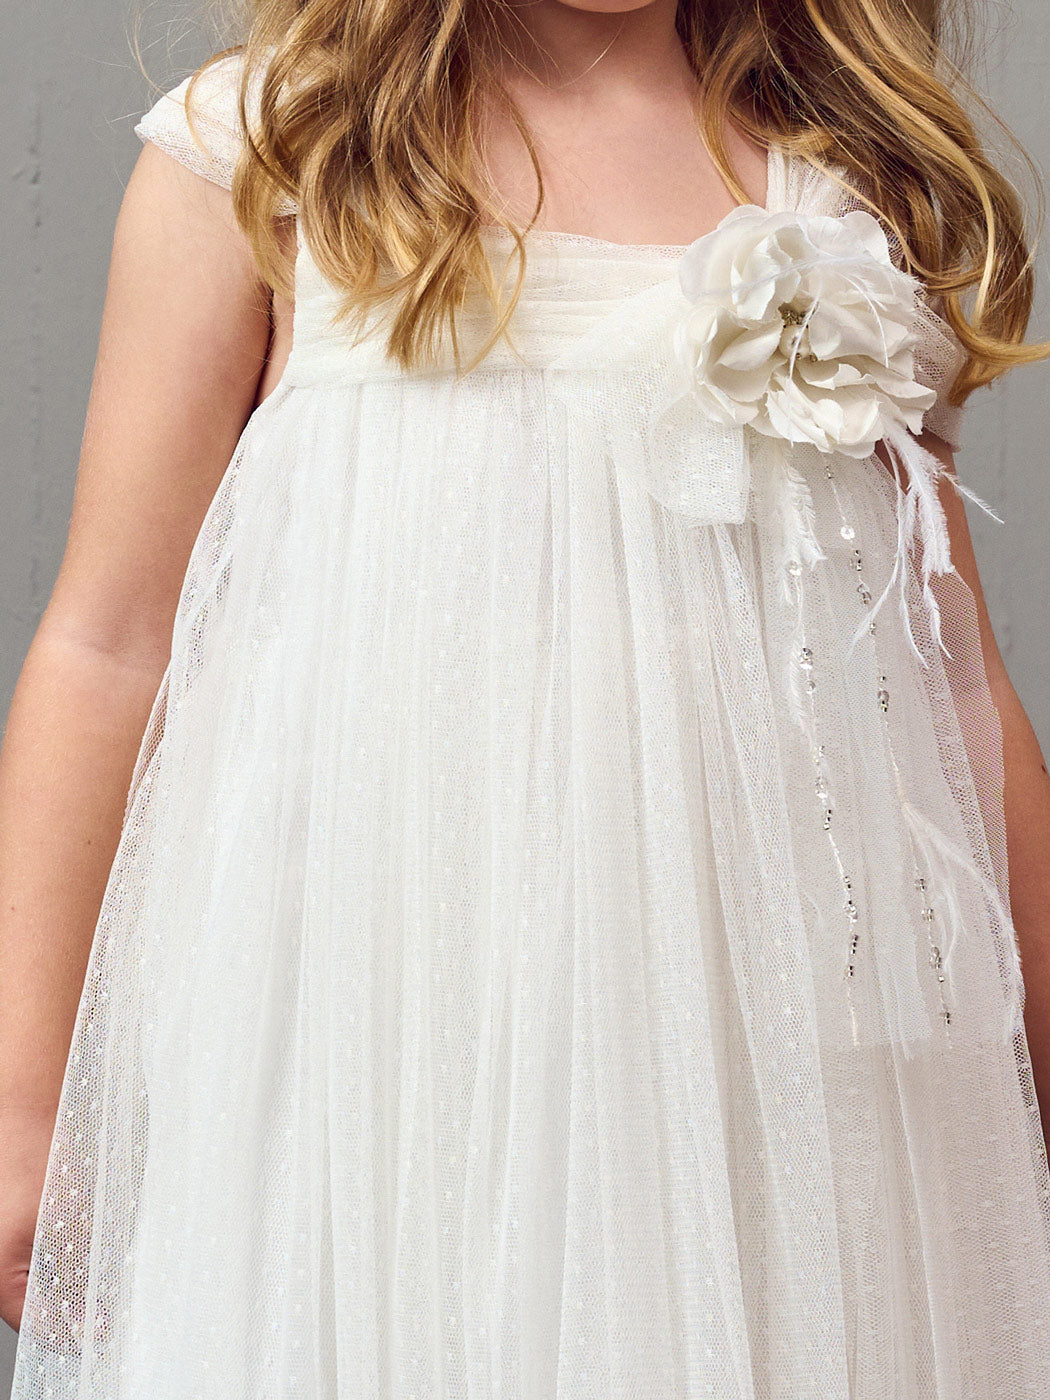 Baptism Tulle dress with polka dots - ANNETA white